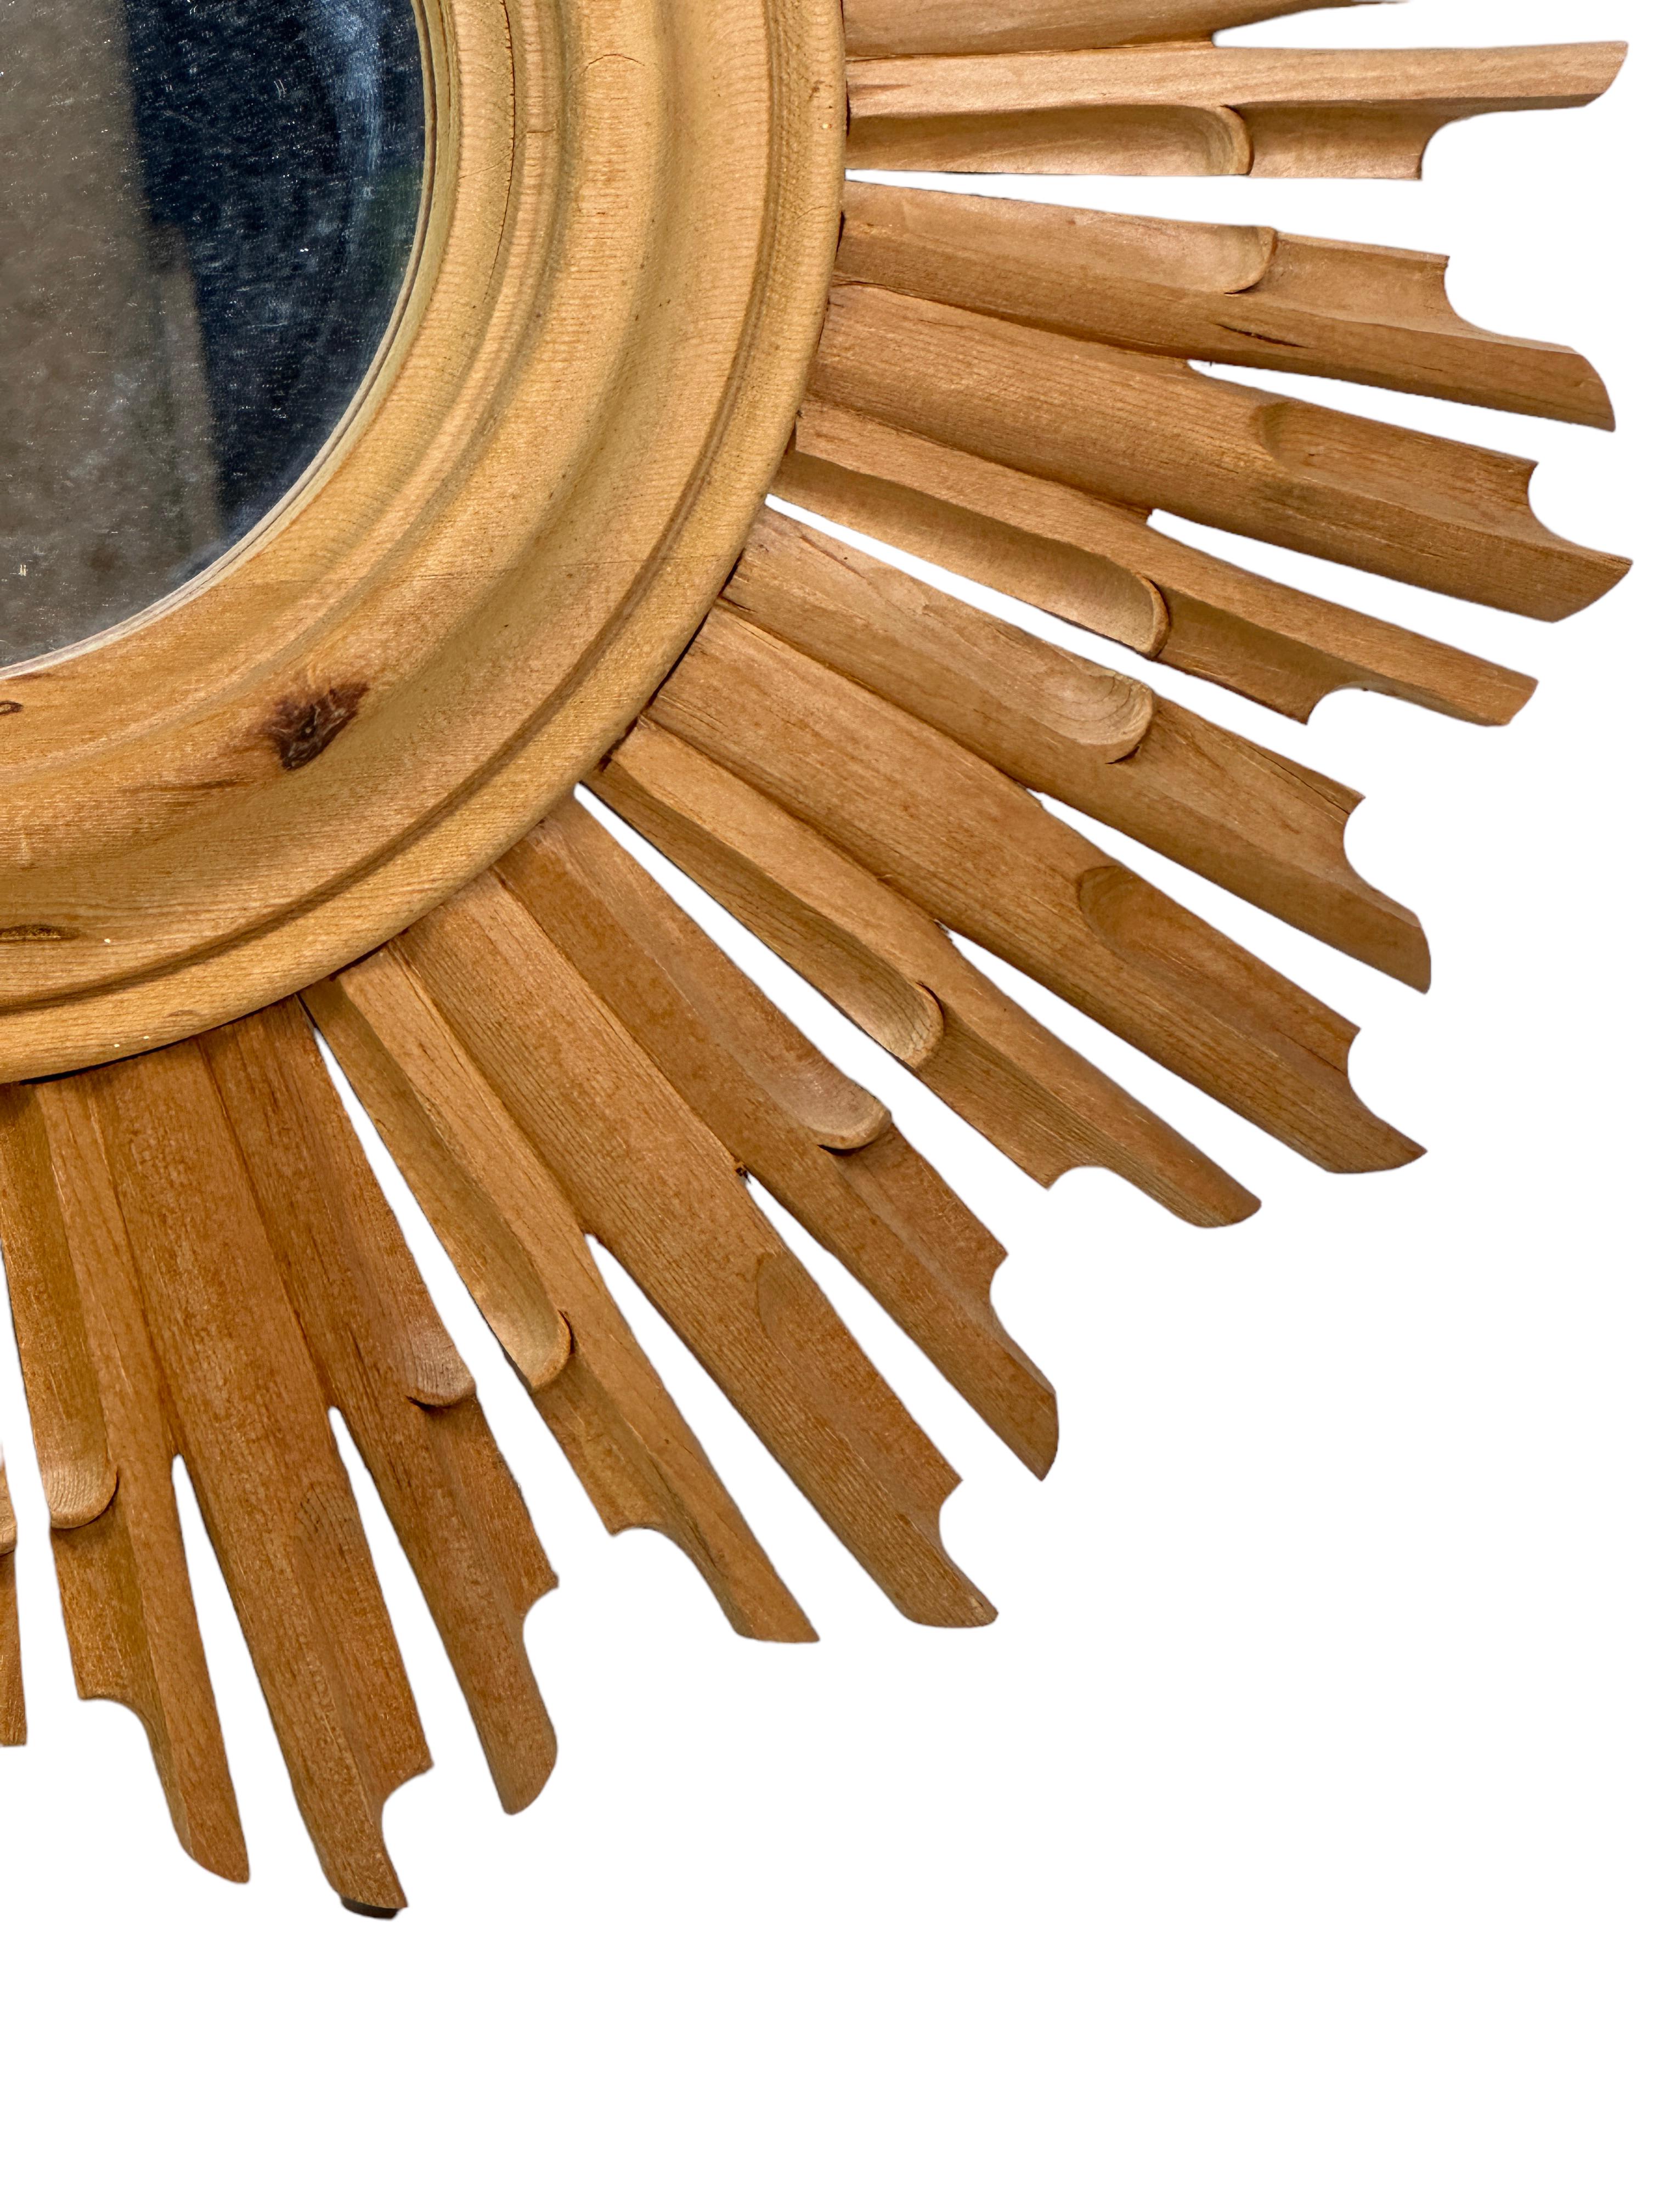 A gorgeous petite starburst sunburst mirror. Made of wood. It measures approximate 22